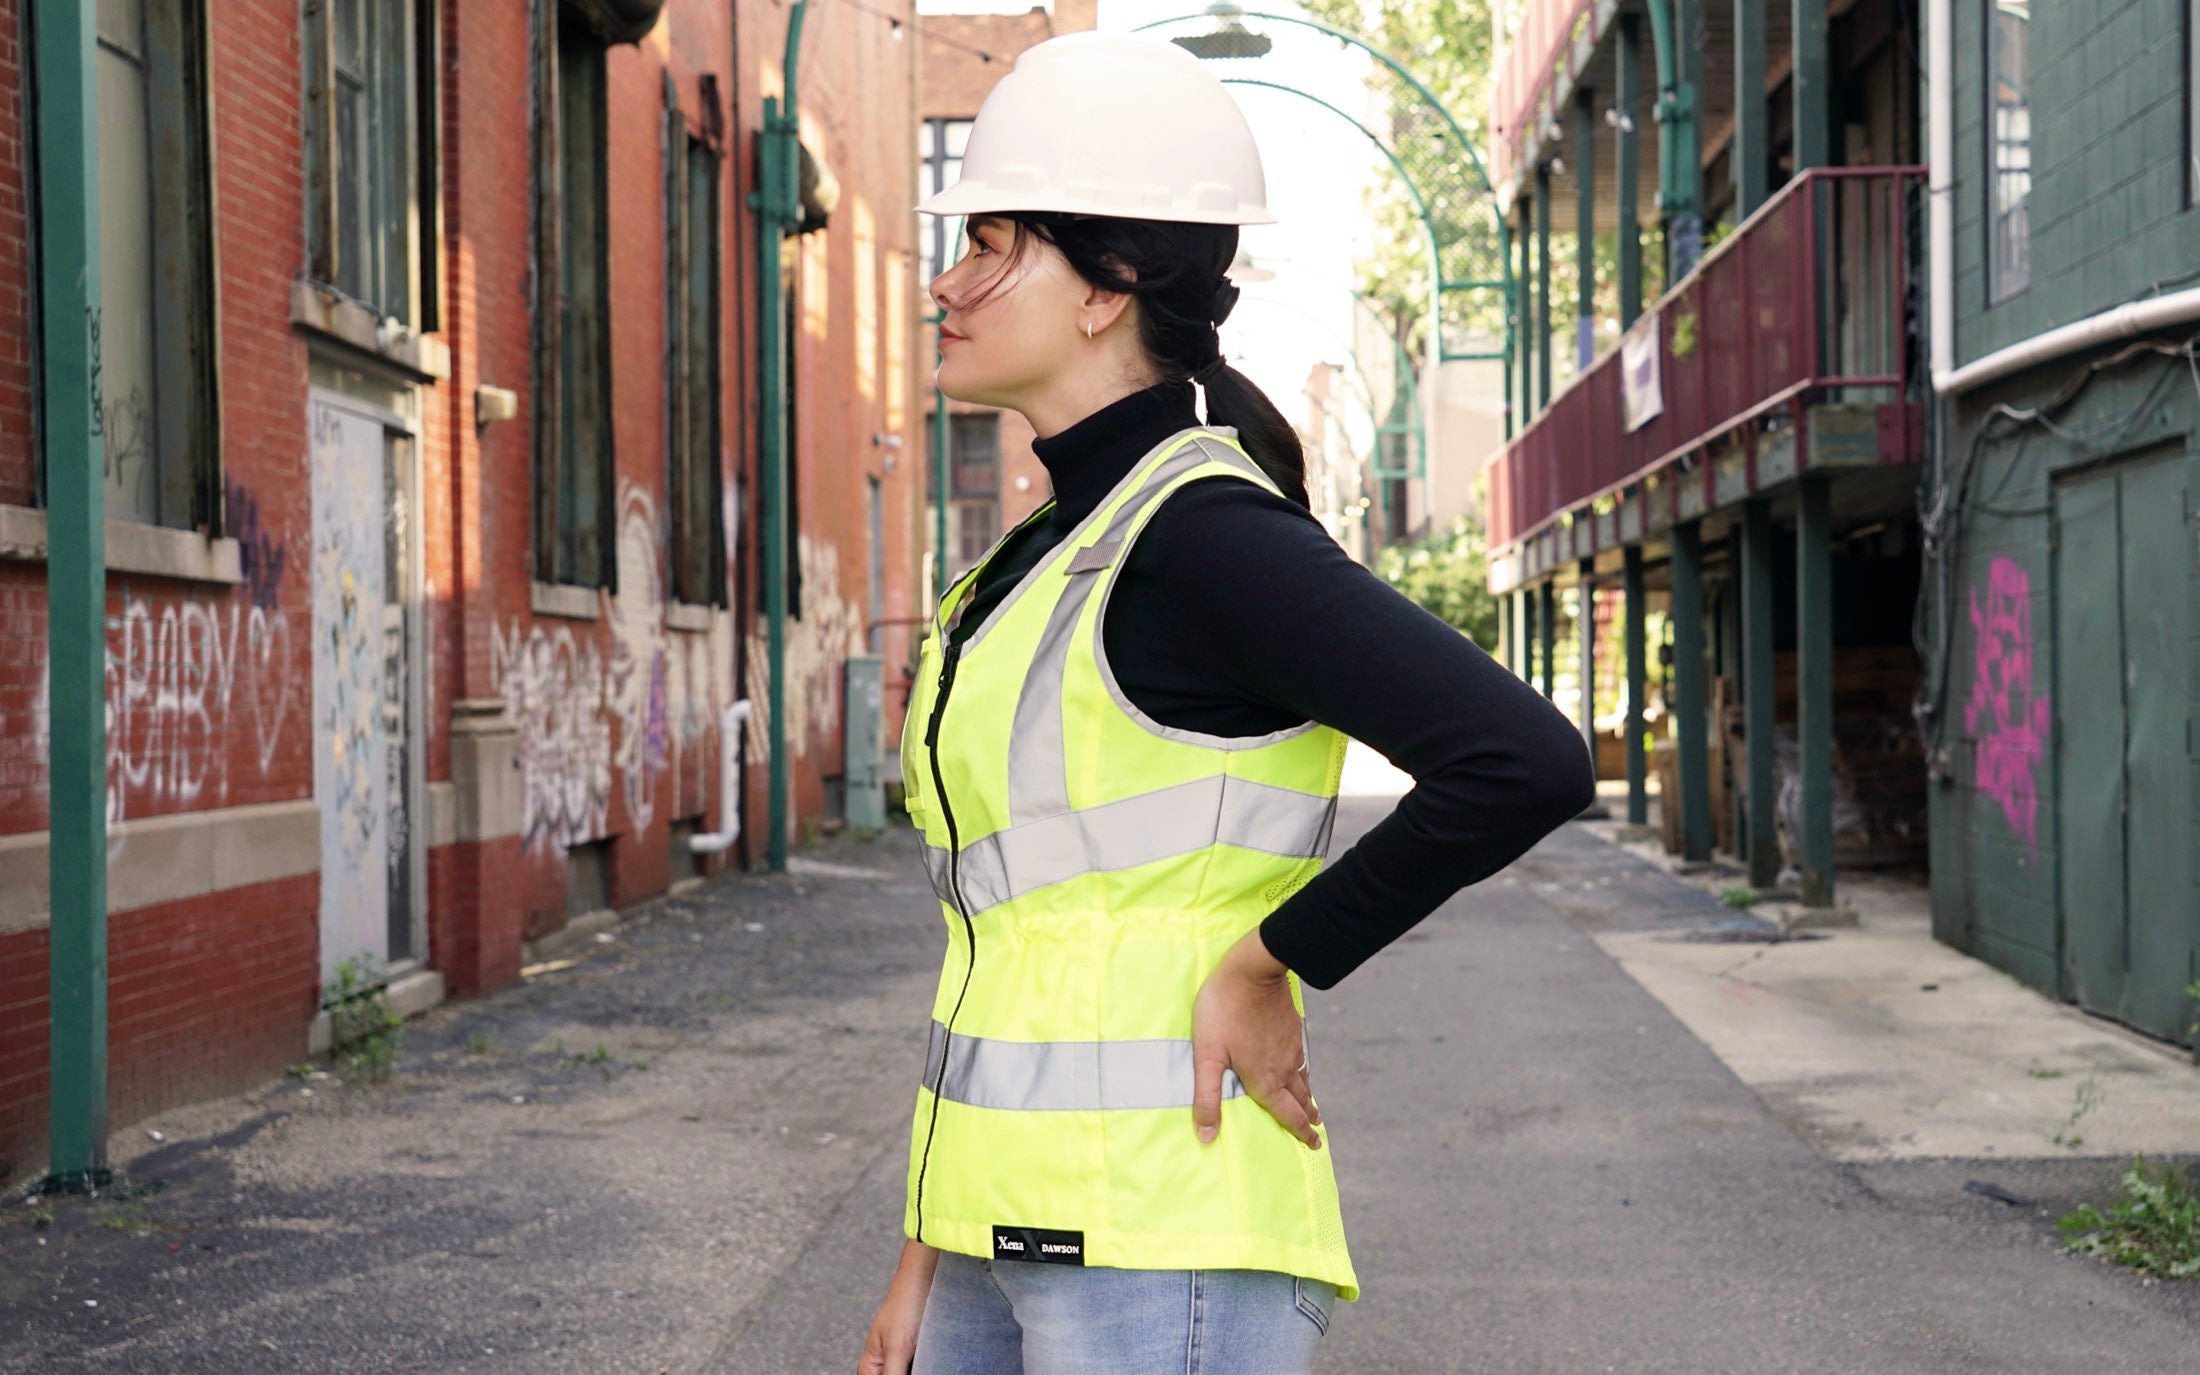 Hi-Vis ANSI Class 2 Safety Vest for Women Designed by Xena Workwear and Dawson Workwear